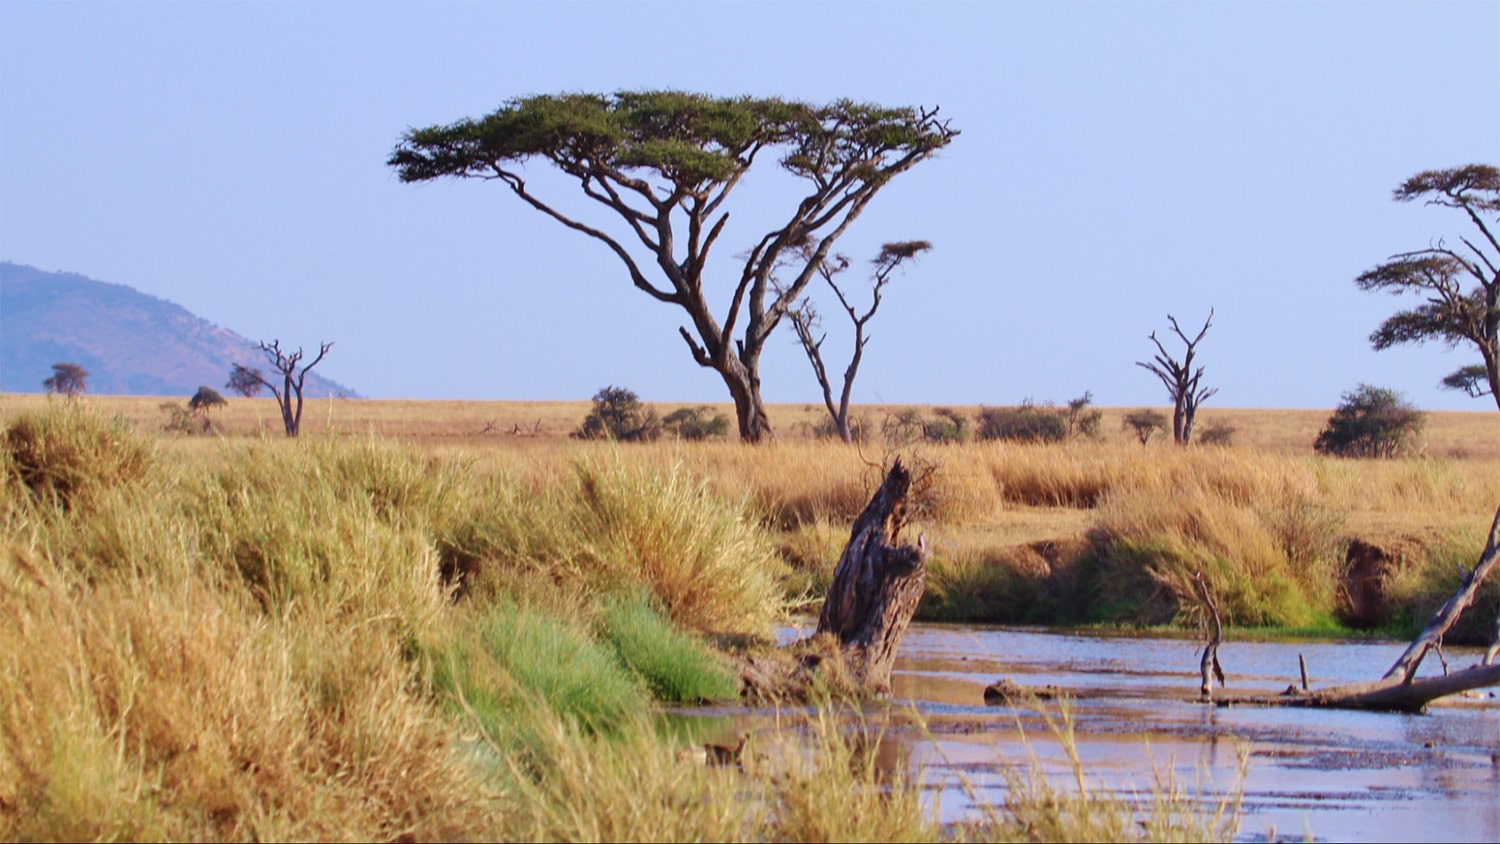 23 interesting facts about Serengeti ecosystem